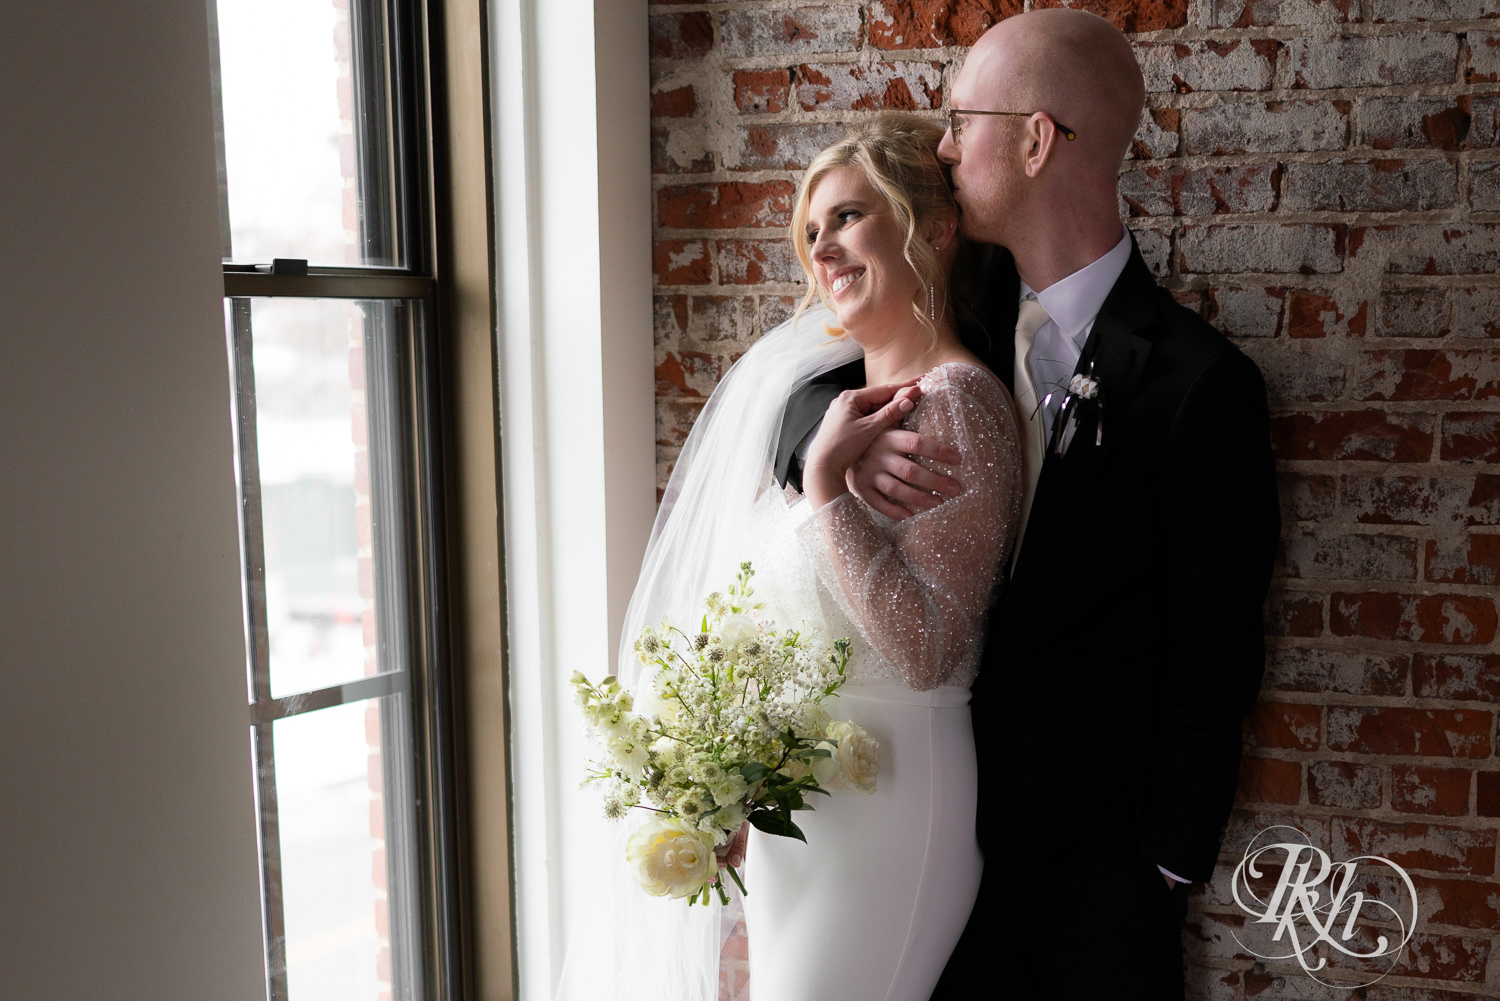 Bride and groom kiss by a window at Gatherings at Station 10 in Saint Paul, Minnesota.